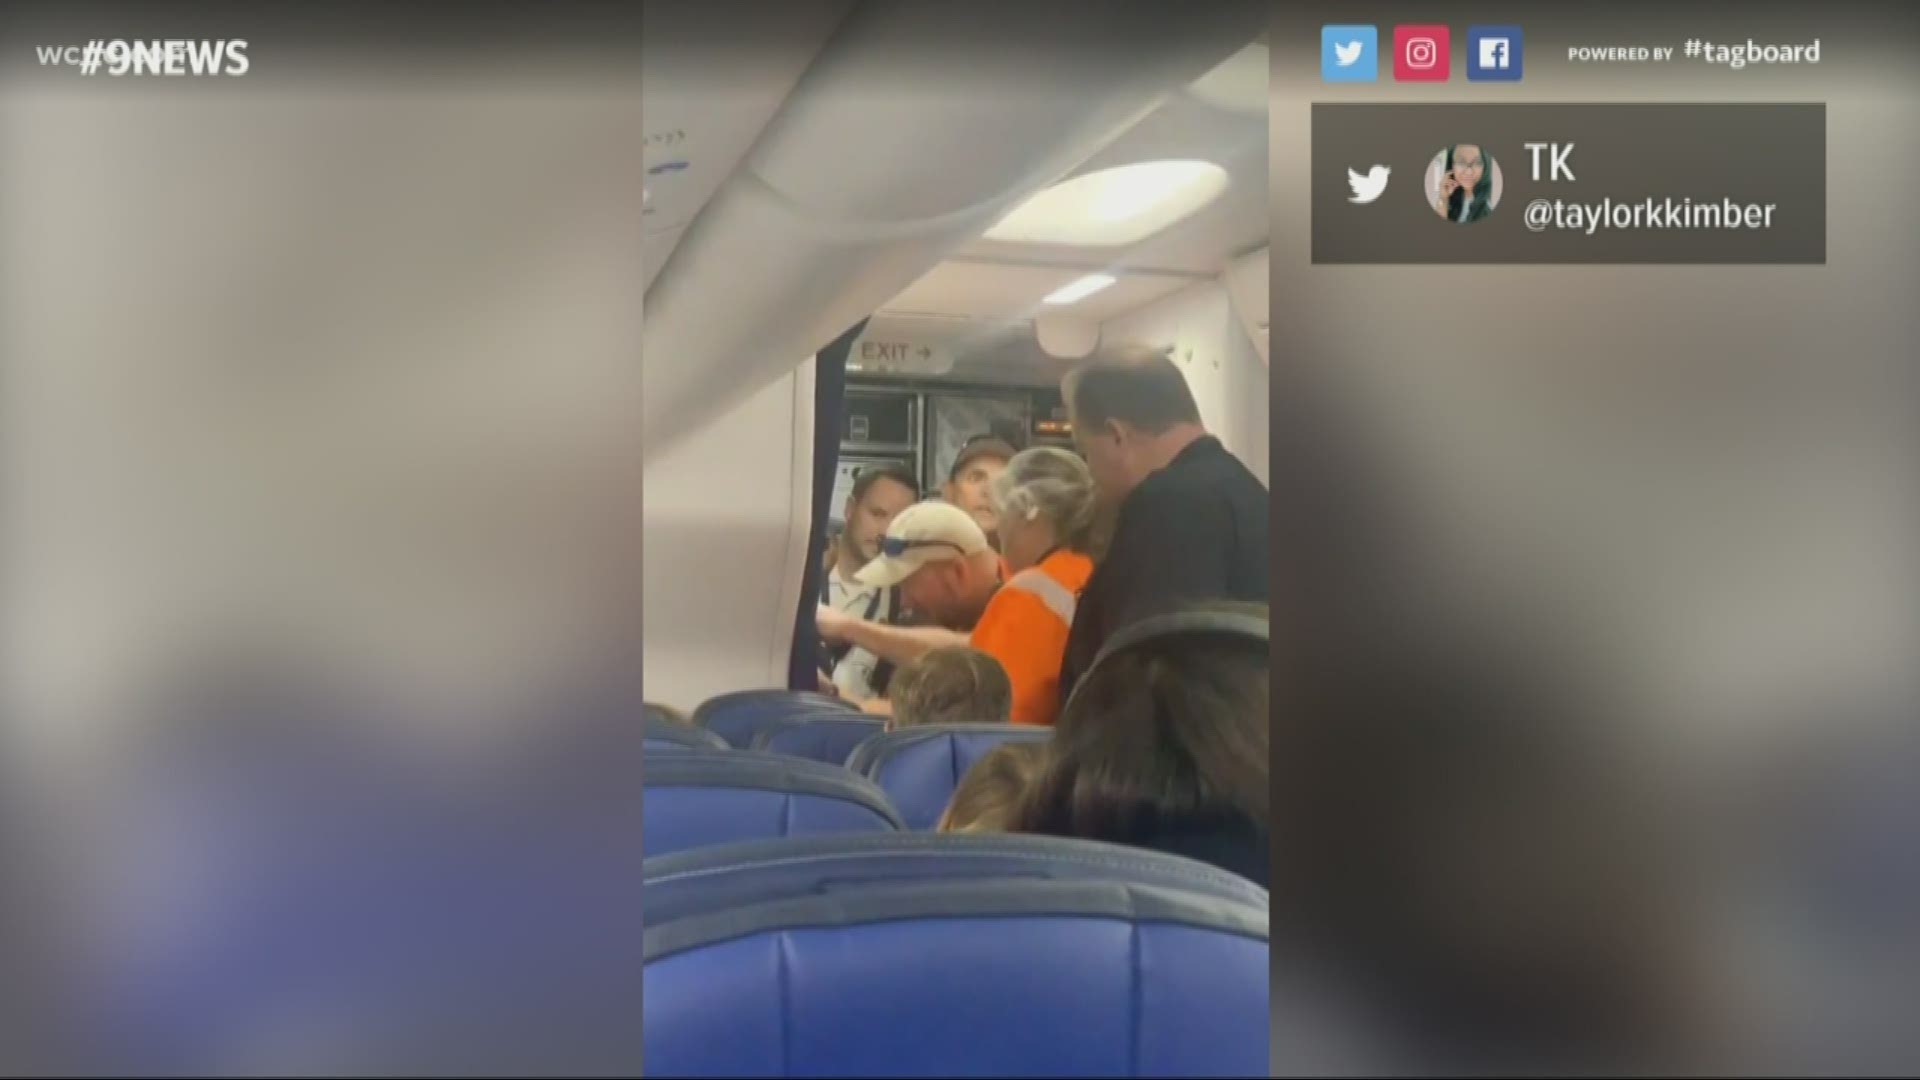 A United Airlines flight had to make an emergency landing in Denver after a person got stuck in the bathroom.